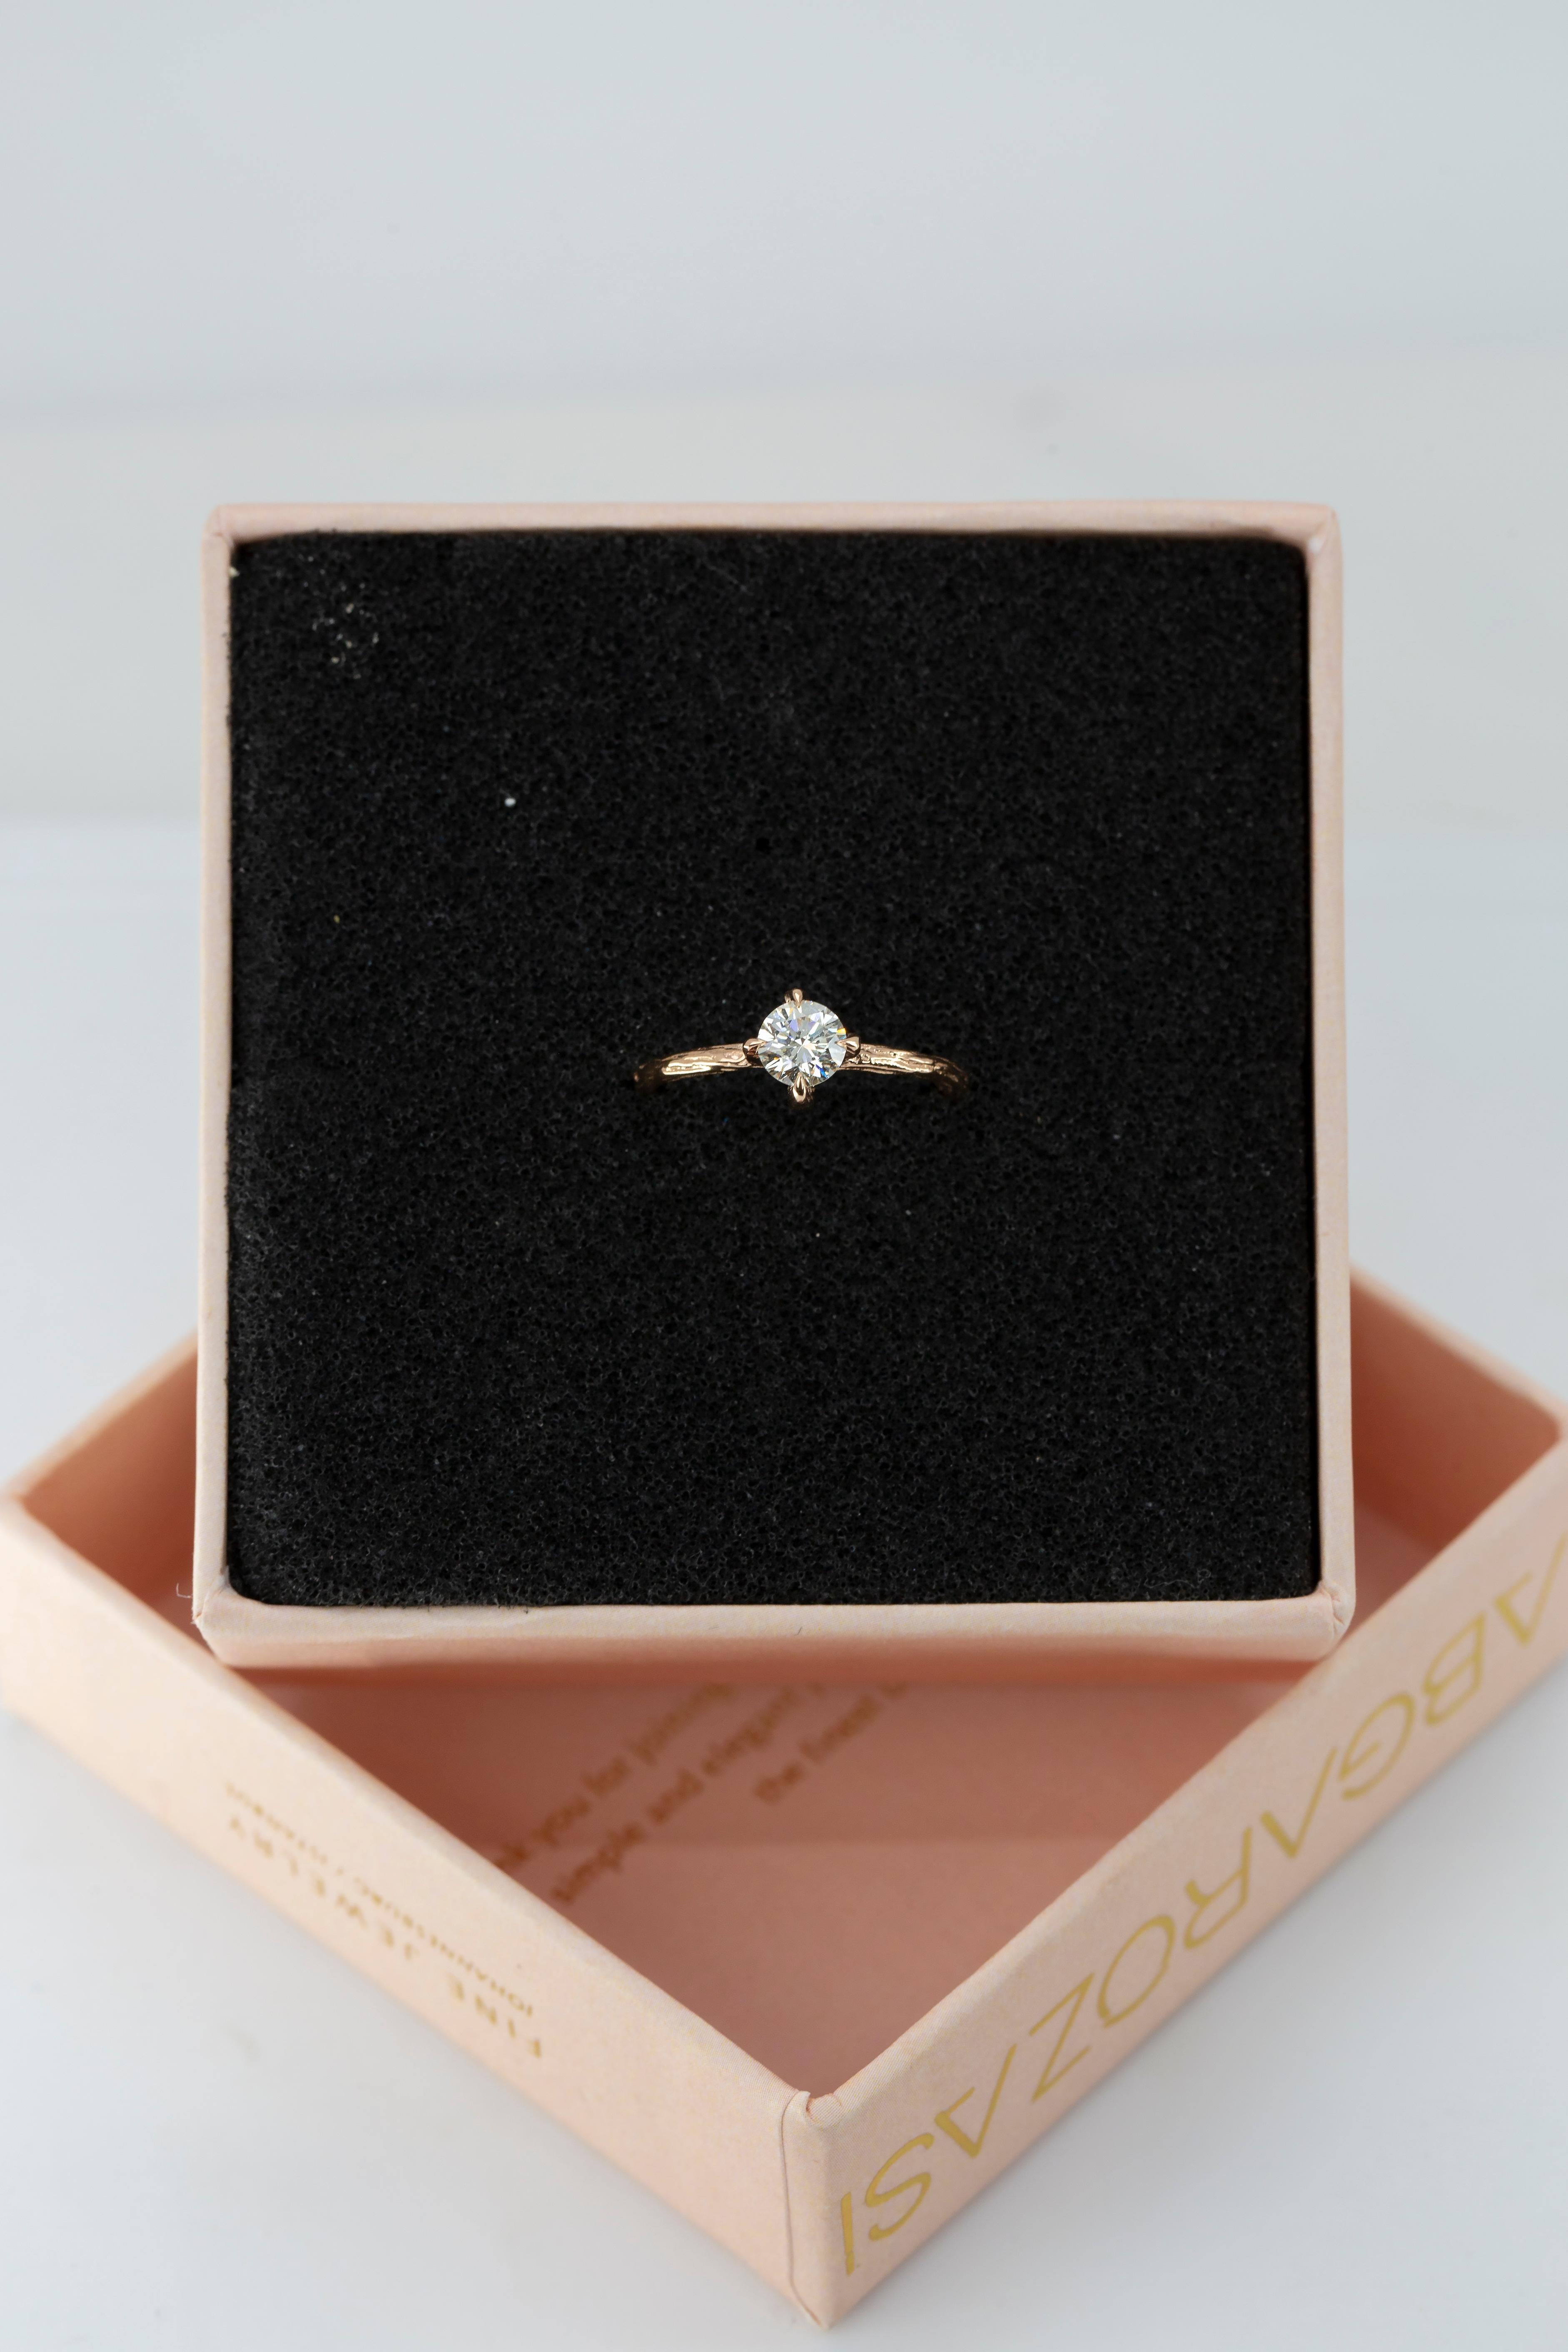 For Sale:  14K Twig Shaped GIA-HRD-IDL Certified 0.52 Ct Diamond Engagement Solitaire Ring 14